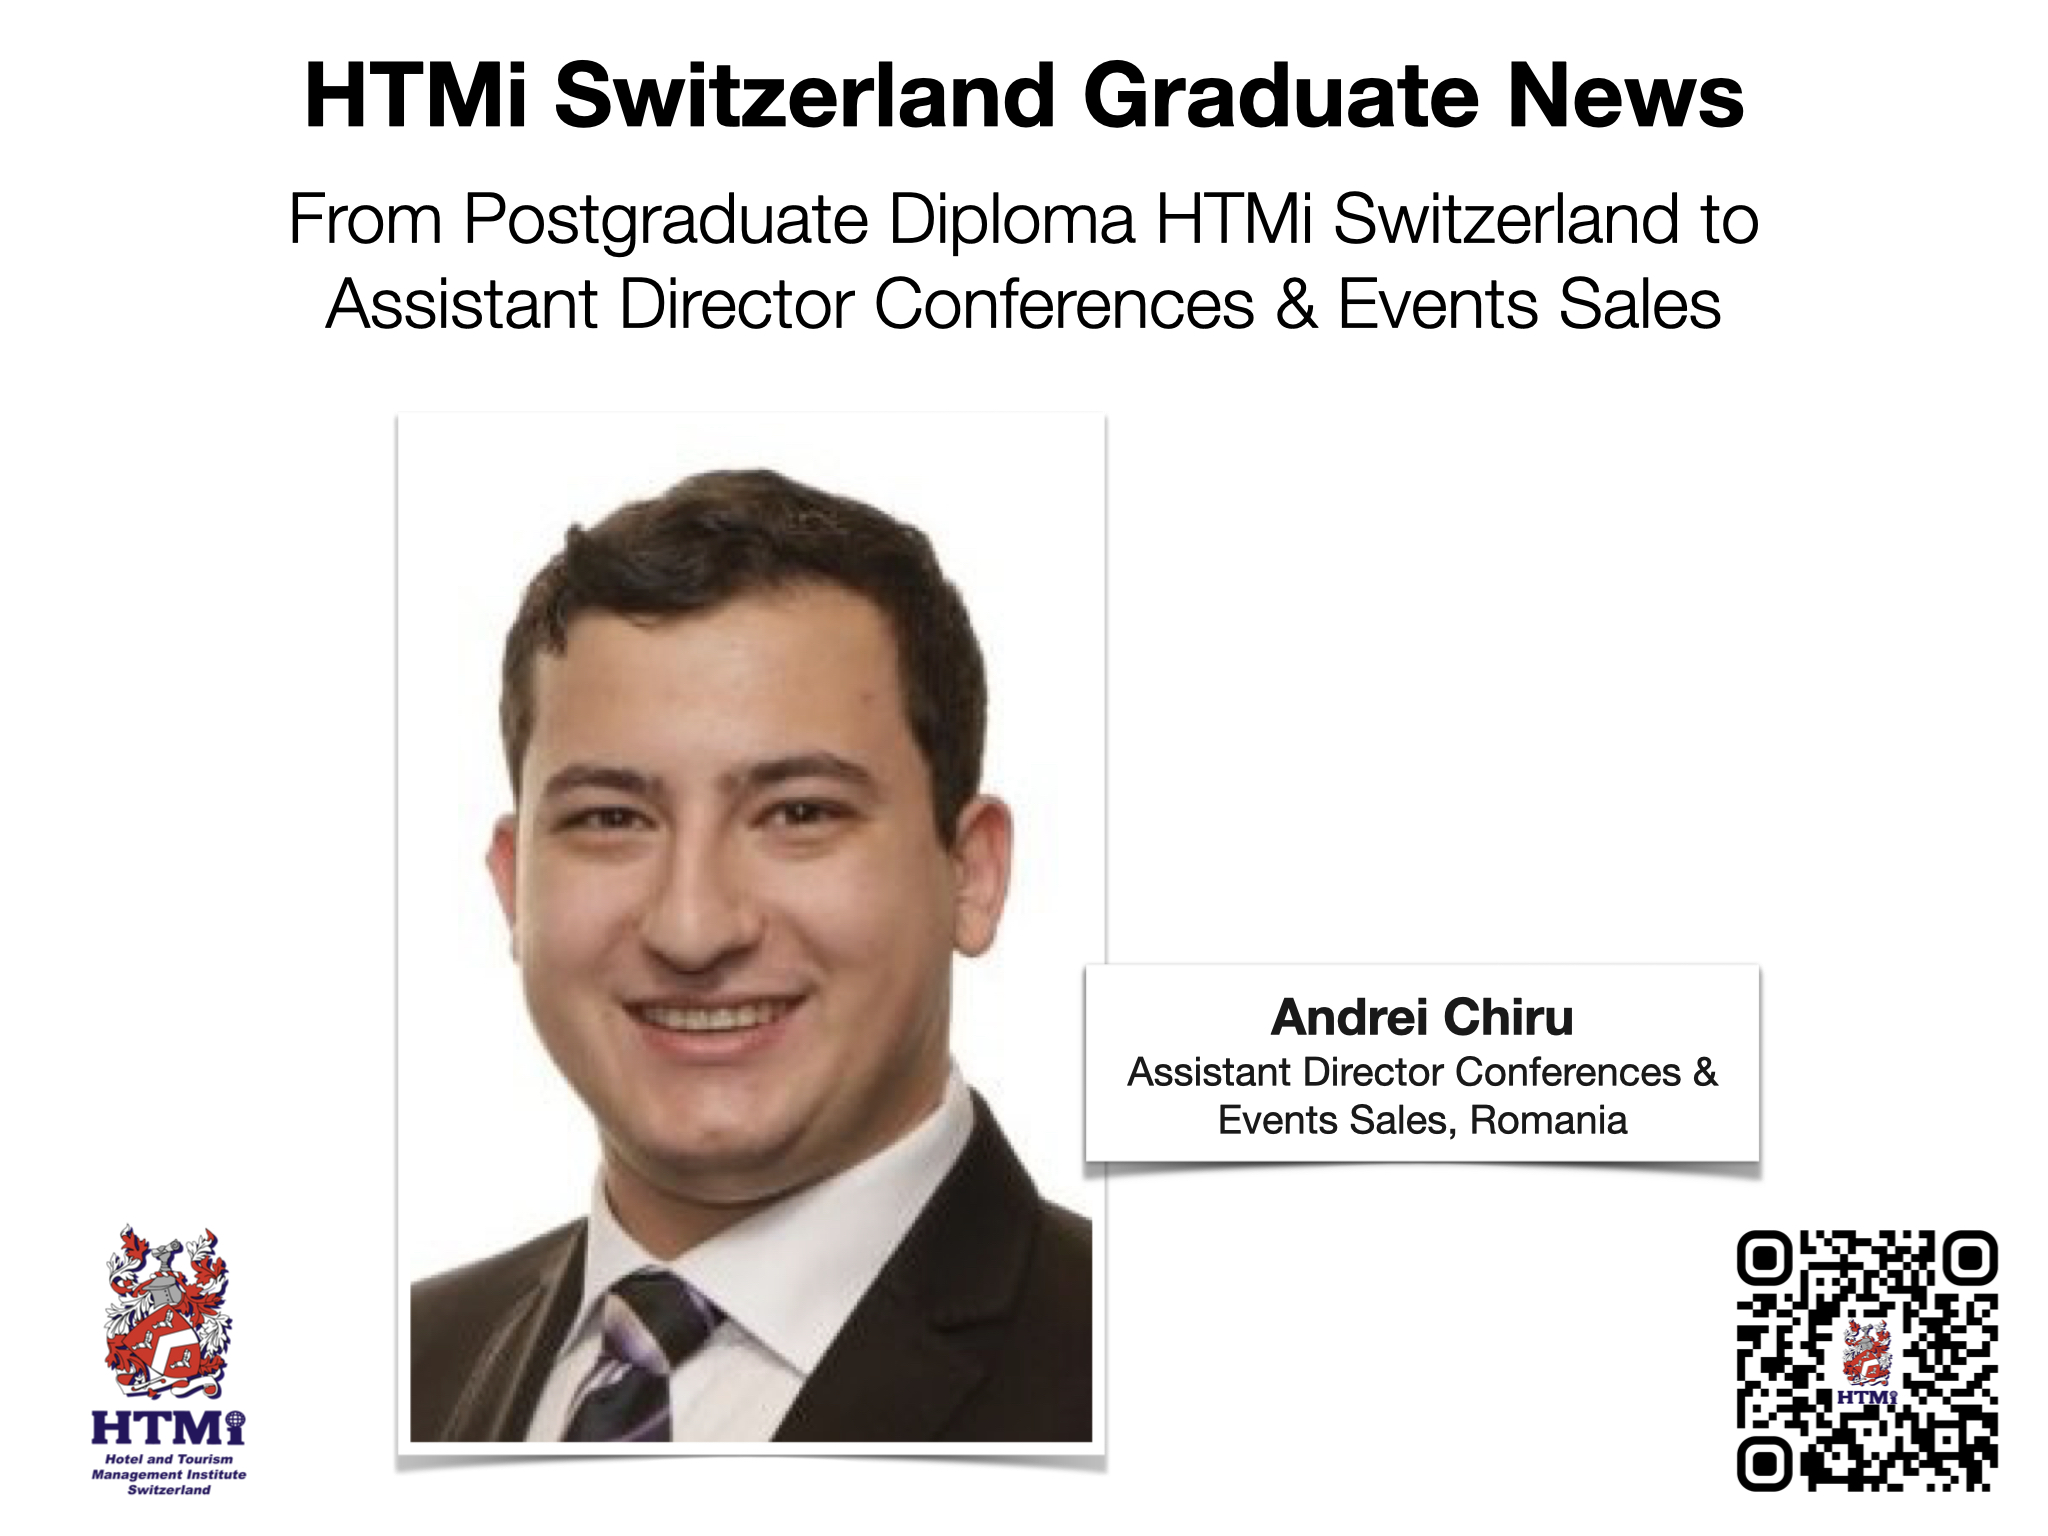 Andrei Chiru - From Postgraduate Diploma HTMi Switzerland to Assistant Director Conferences & Events Sales